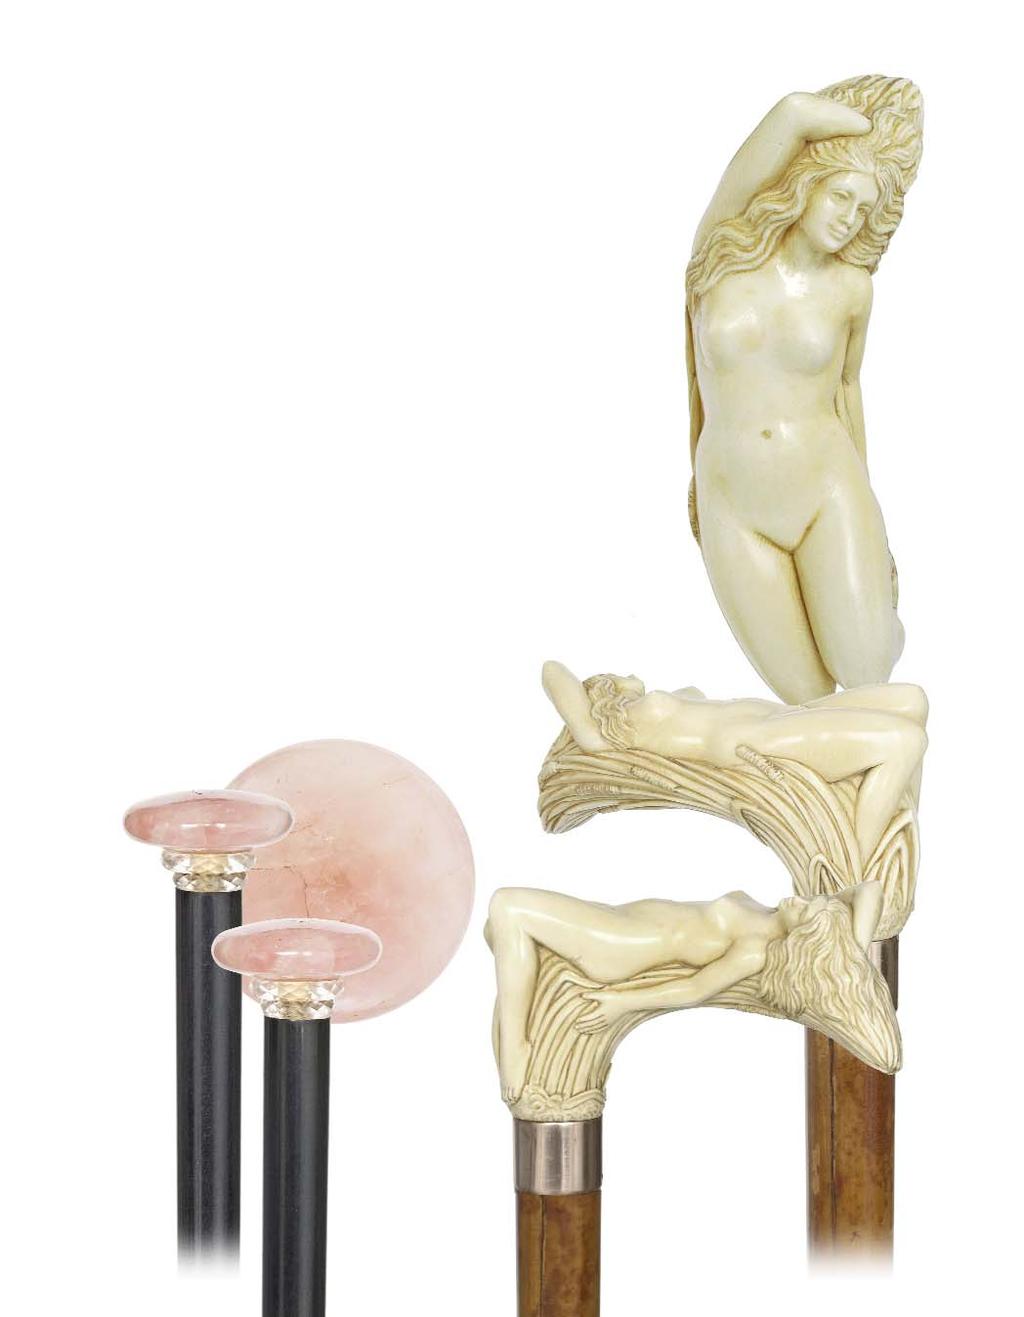 47. Erotic Ivory Dress Cane Circa 1890, European most likely French-A museum quality carving of a nude lady, gracefully reclining on reeds with a folded right arm behind the head, exposing all the